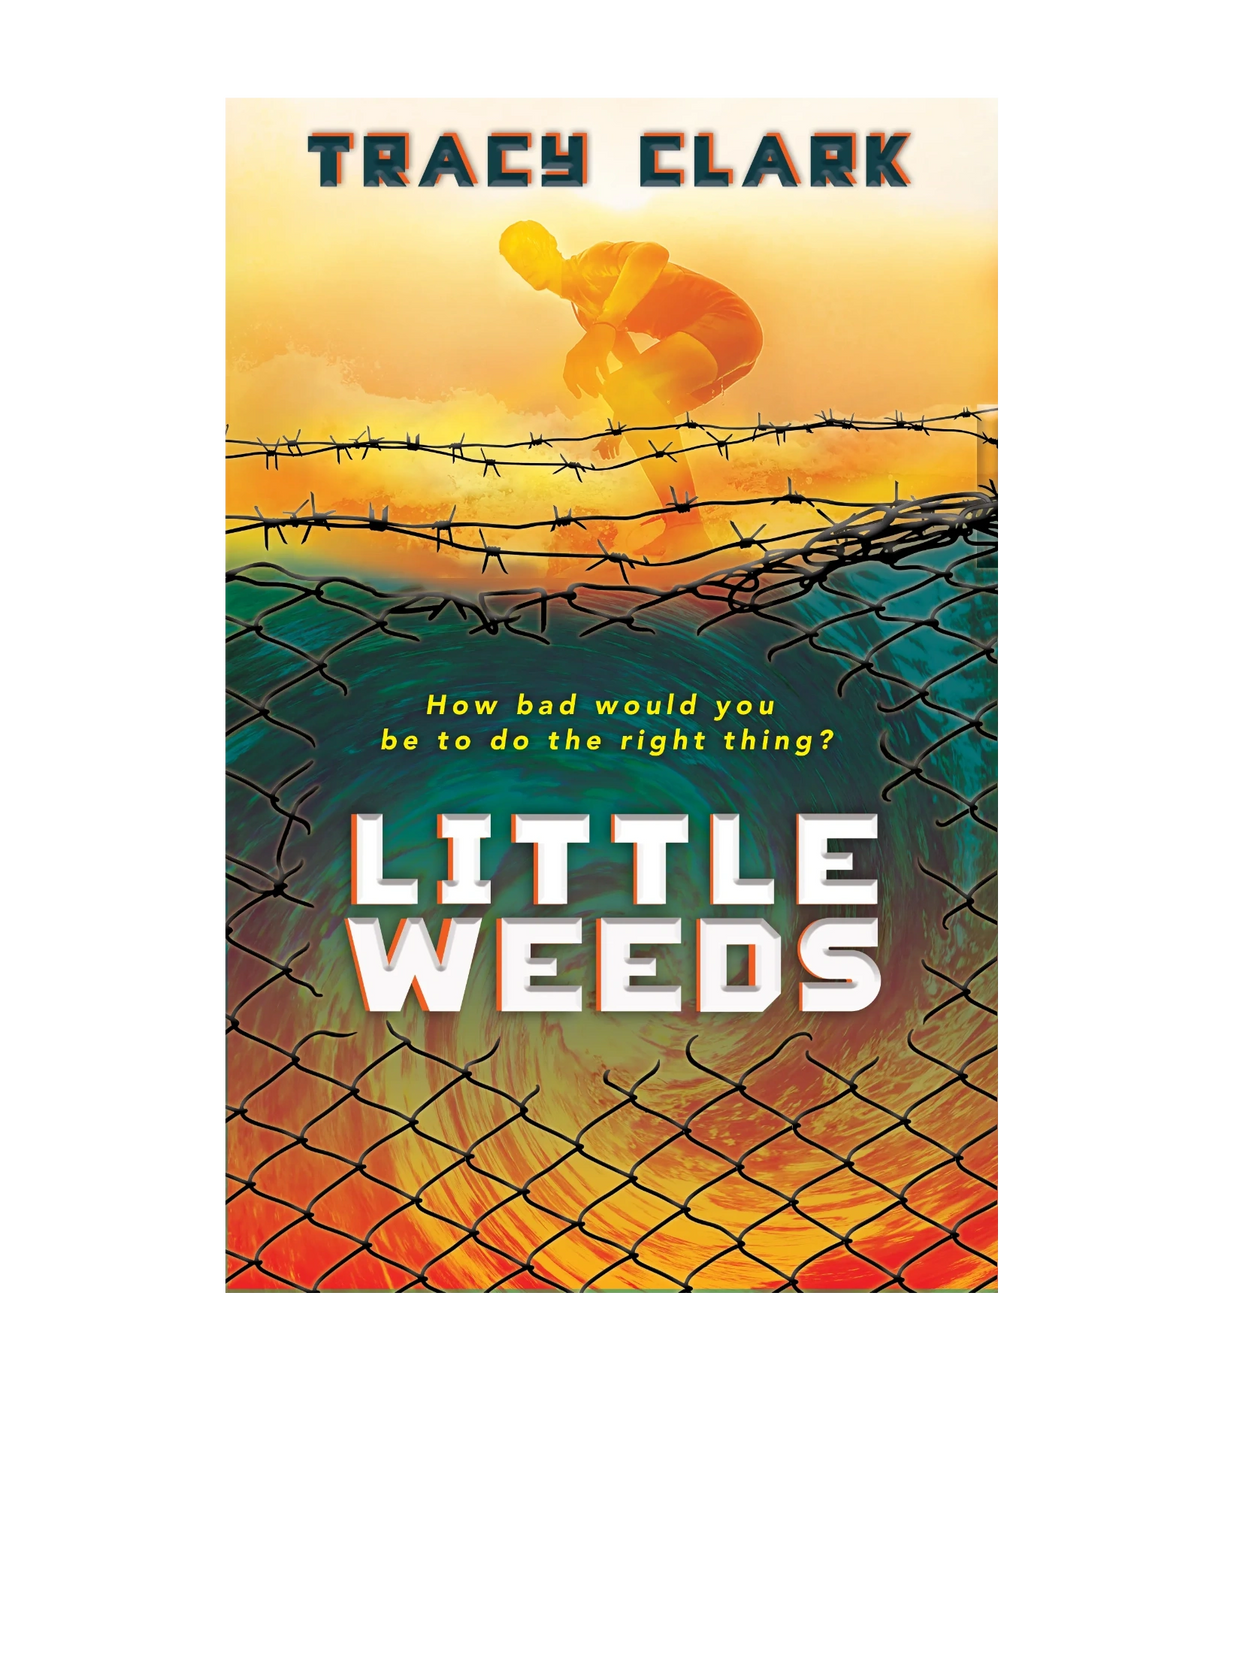 Little Weeds is a young adult dystopian by author Tracy Clark